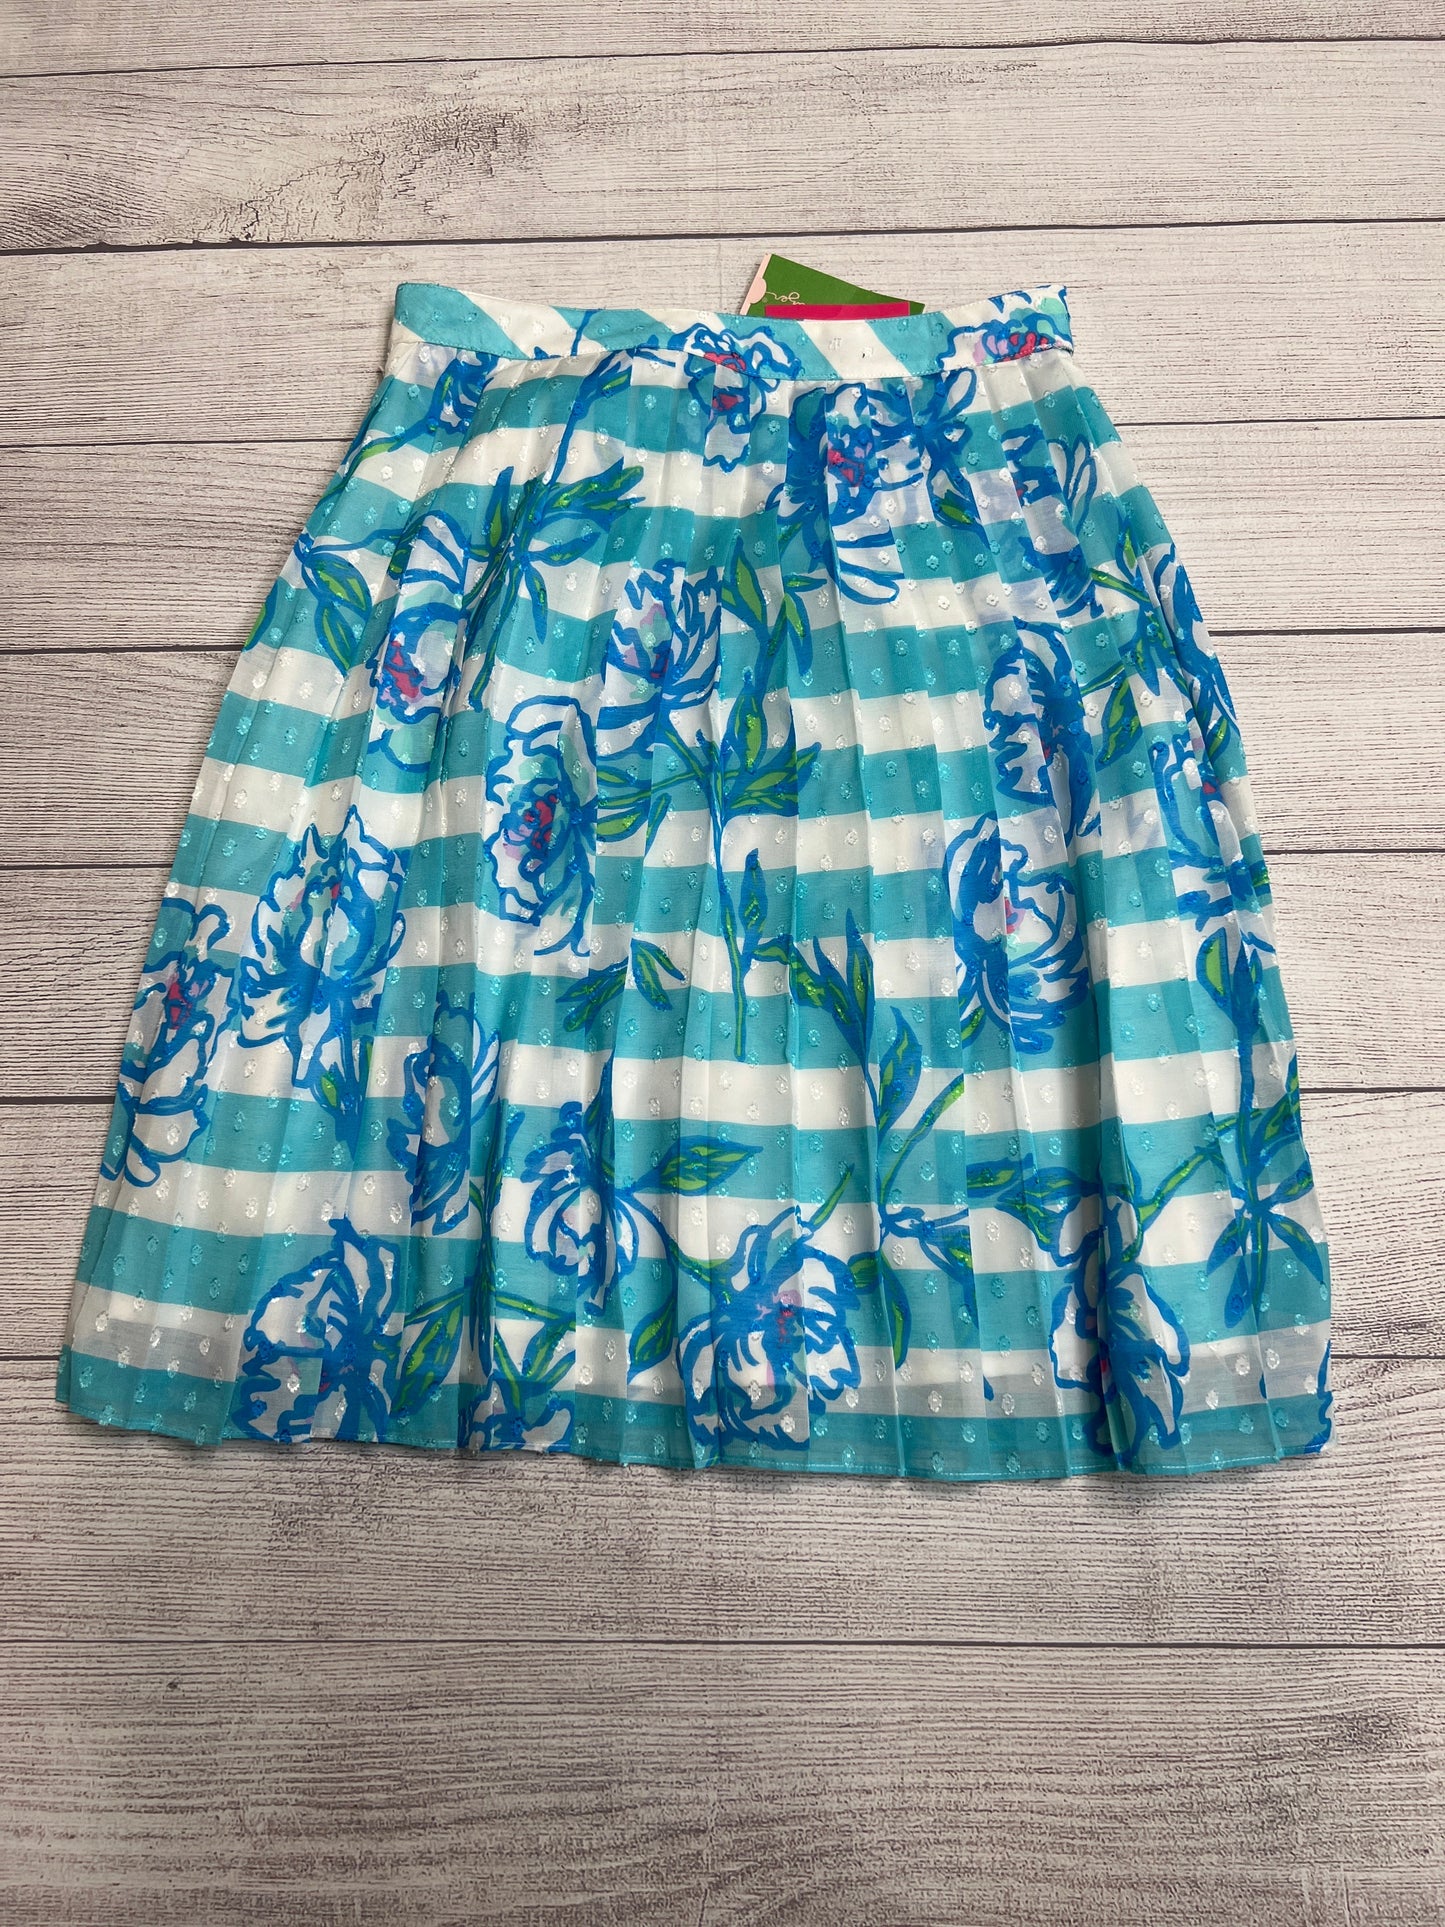 Skirt Midi By Lilly Pulitzer  Size: 4